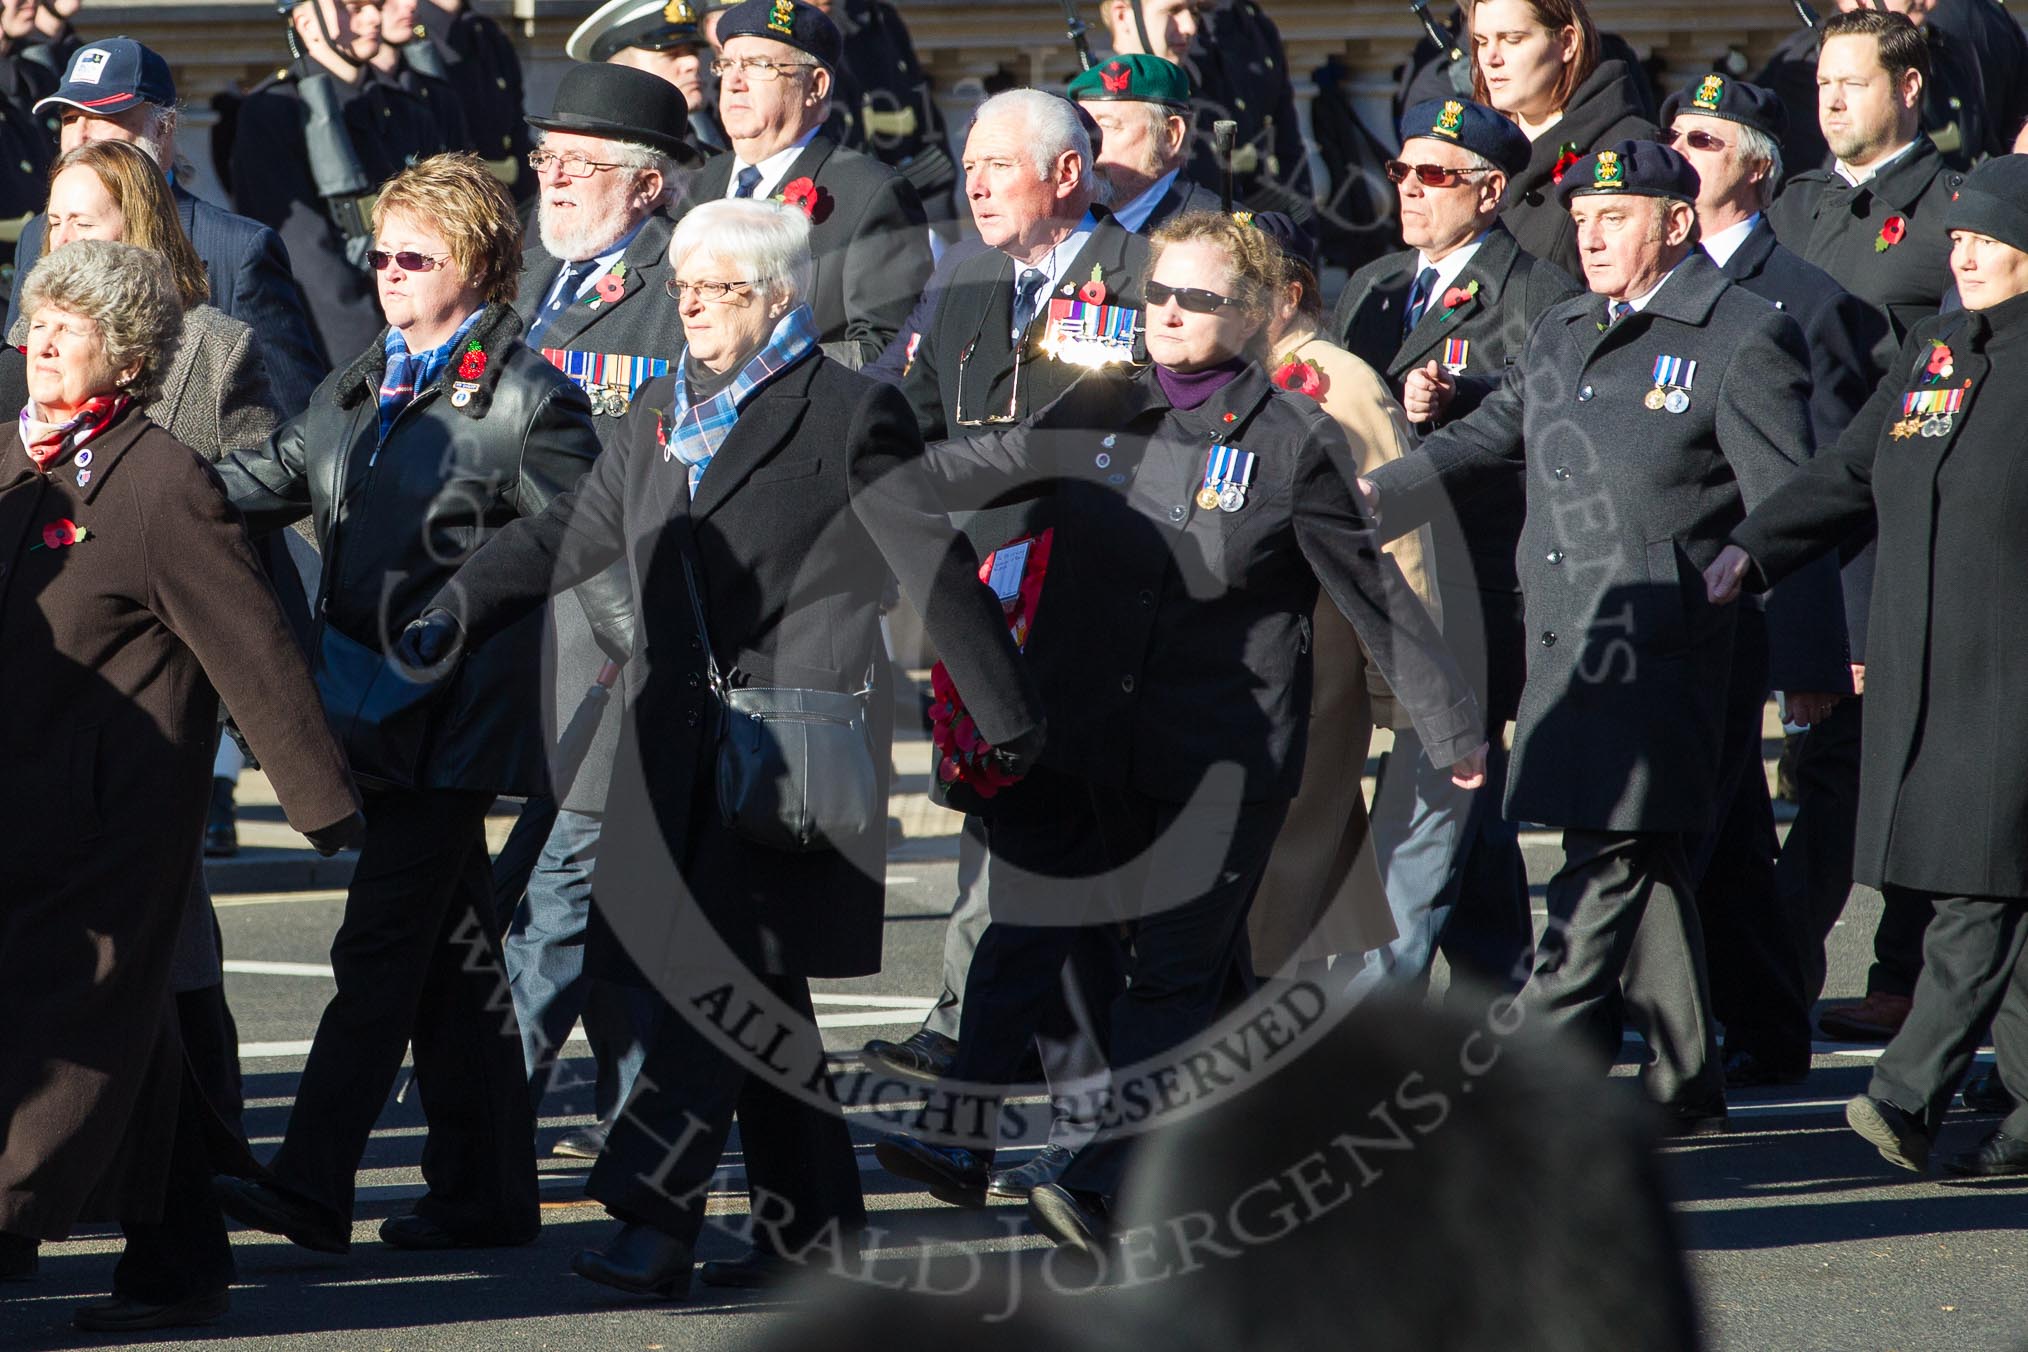 Remembrance Sunday 2012 Cenotaph March Past: Group E29 - Association of WRENS and E30 - Royal Fleet Auxiliary Association..
Whitehall, Cenotaph,
London SW1,

United Kingdom,
on 11 November 2012 at 11:41, image #218